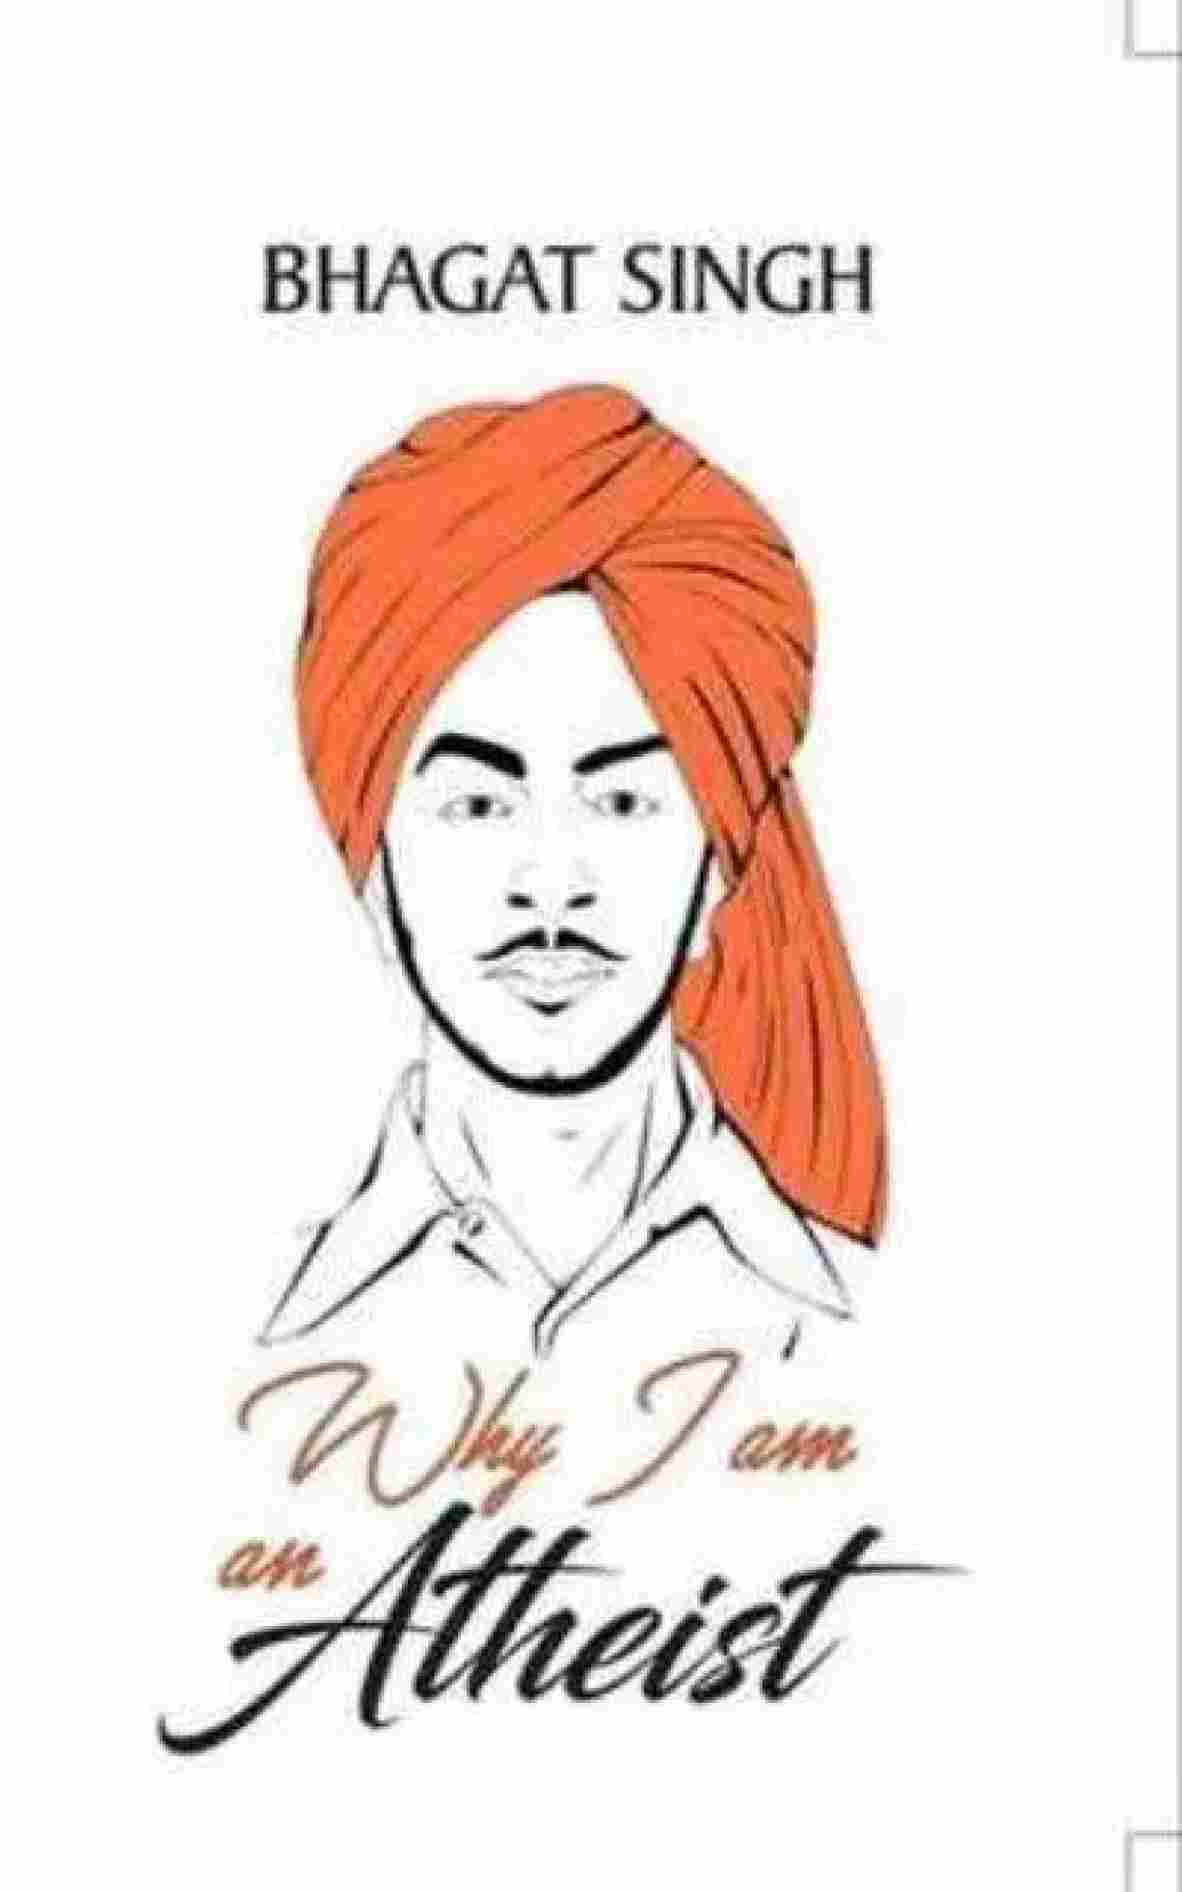 Why I am an Atheist (Paperback) by Bhagat Singh